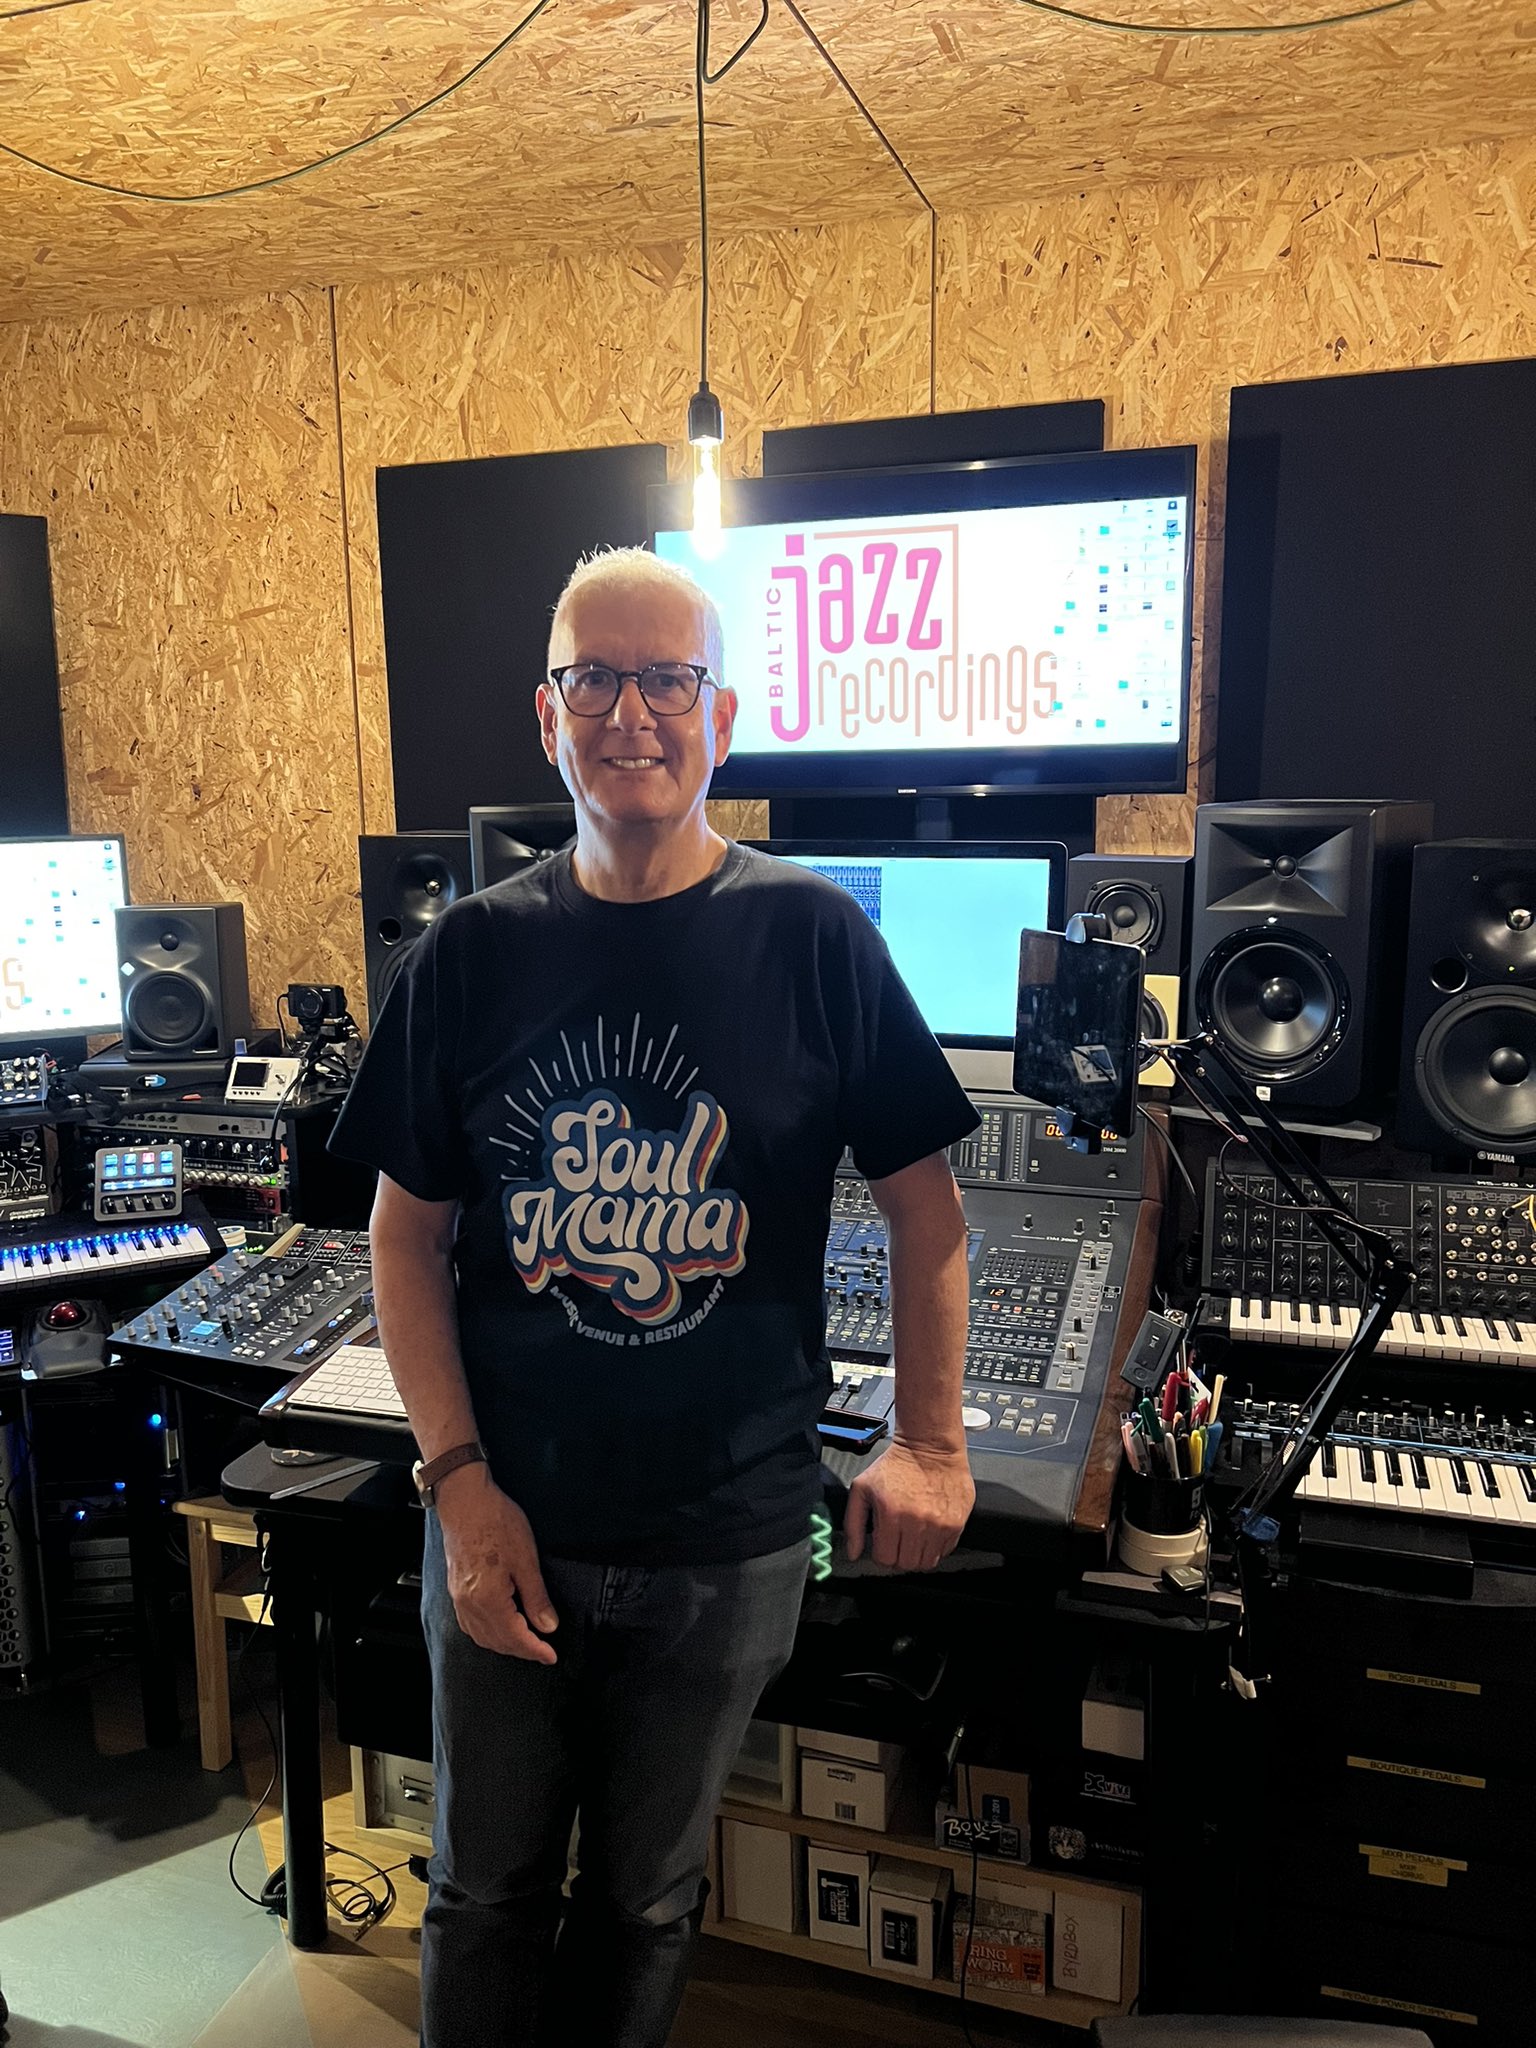 Steve Levine on X: @yolandabrown wow how cool is this new soul mama  t-shirt Excellent quality and of course it's all part of the exciting new  venue ! @JazzBaltic @loislevinmusic  /